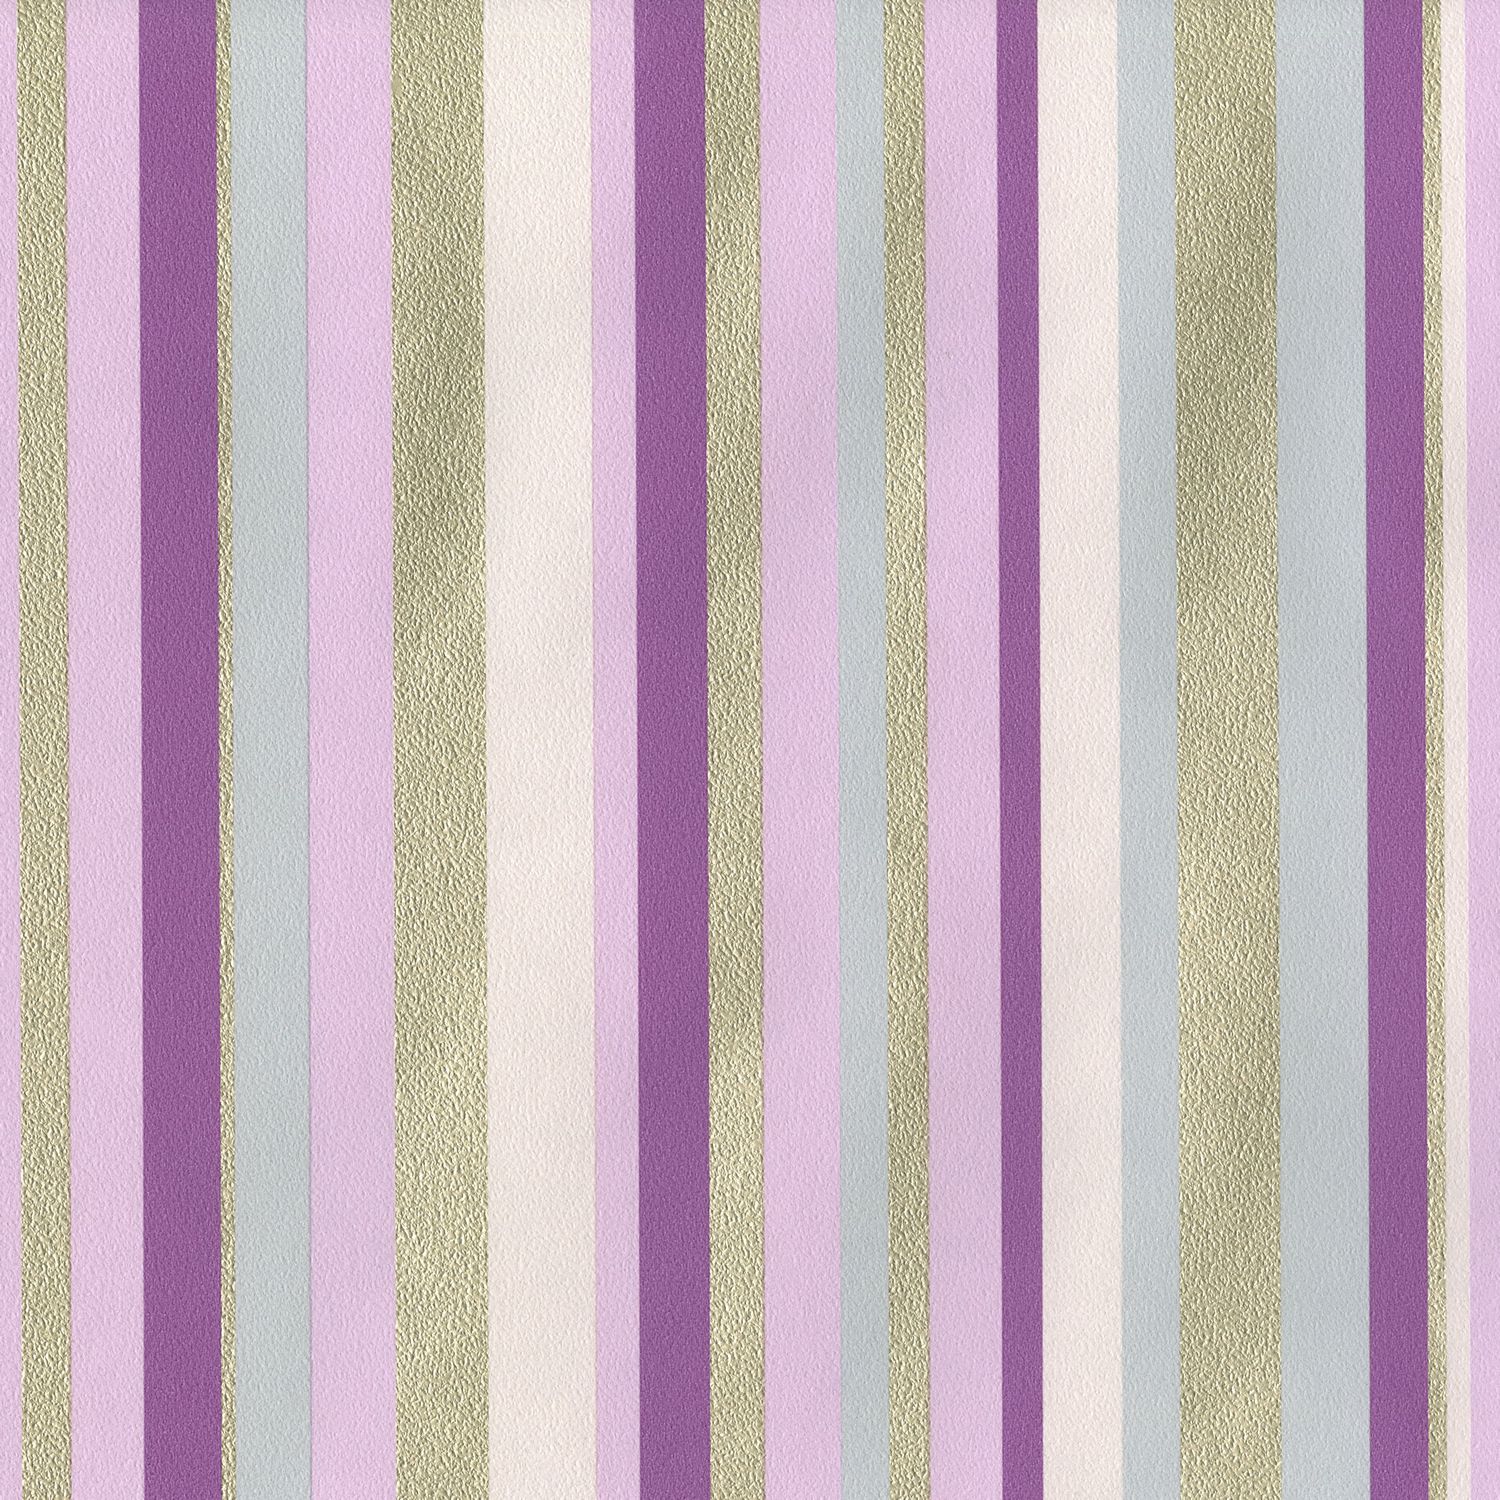 Striped Wallpaper Next Day Delivery Striped Wallpaper from